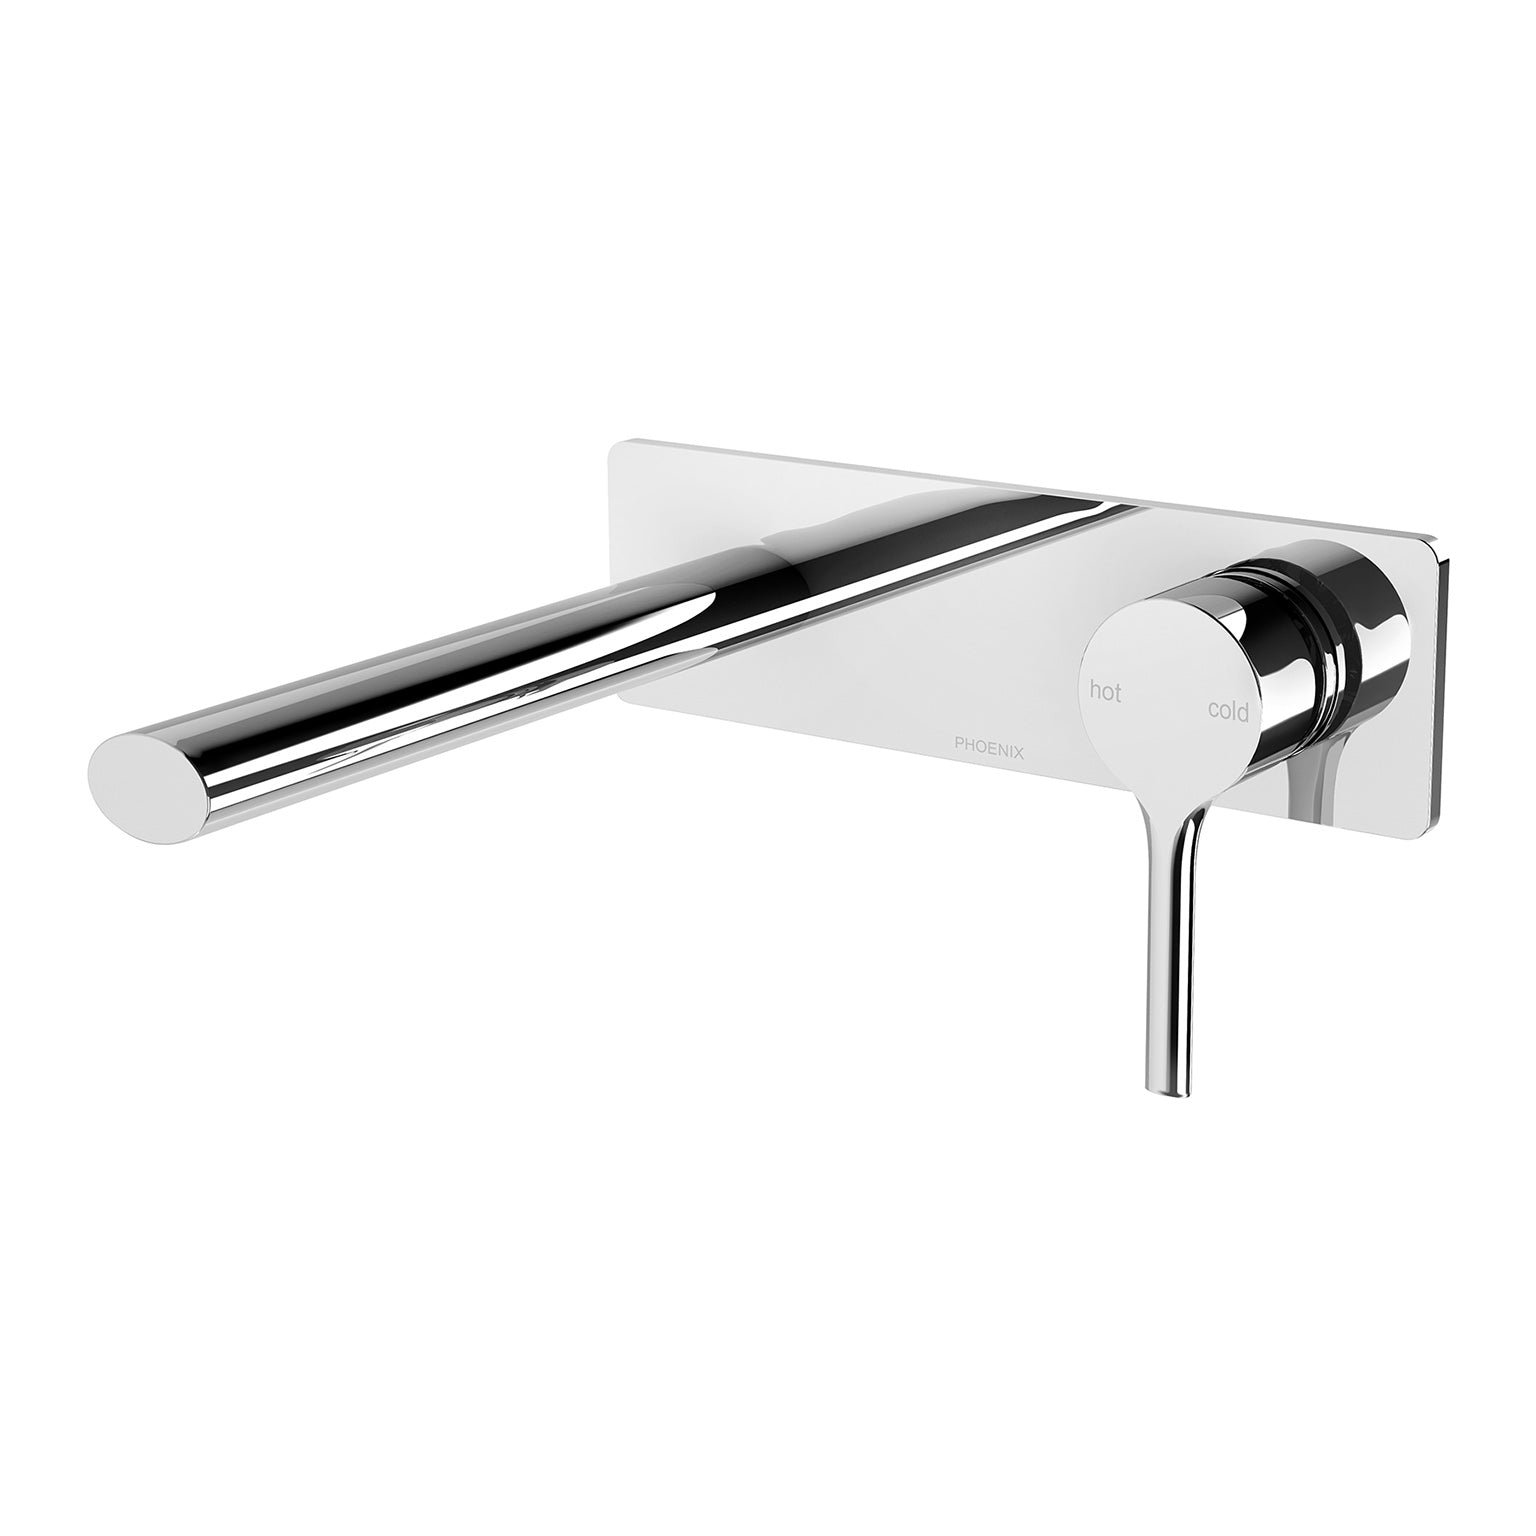 PHOENIX VIVID SLIMLINE OVAL SWITCHMIX WALL BASIN / BATH MIXER SET FIT-OFF AND ROUGH-IN KIT 175MM CHROME